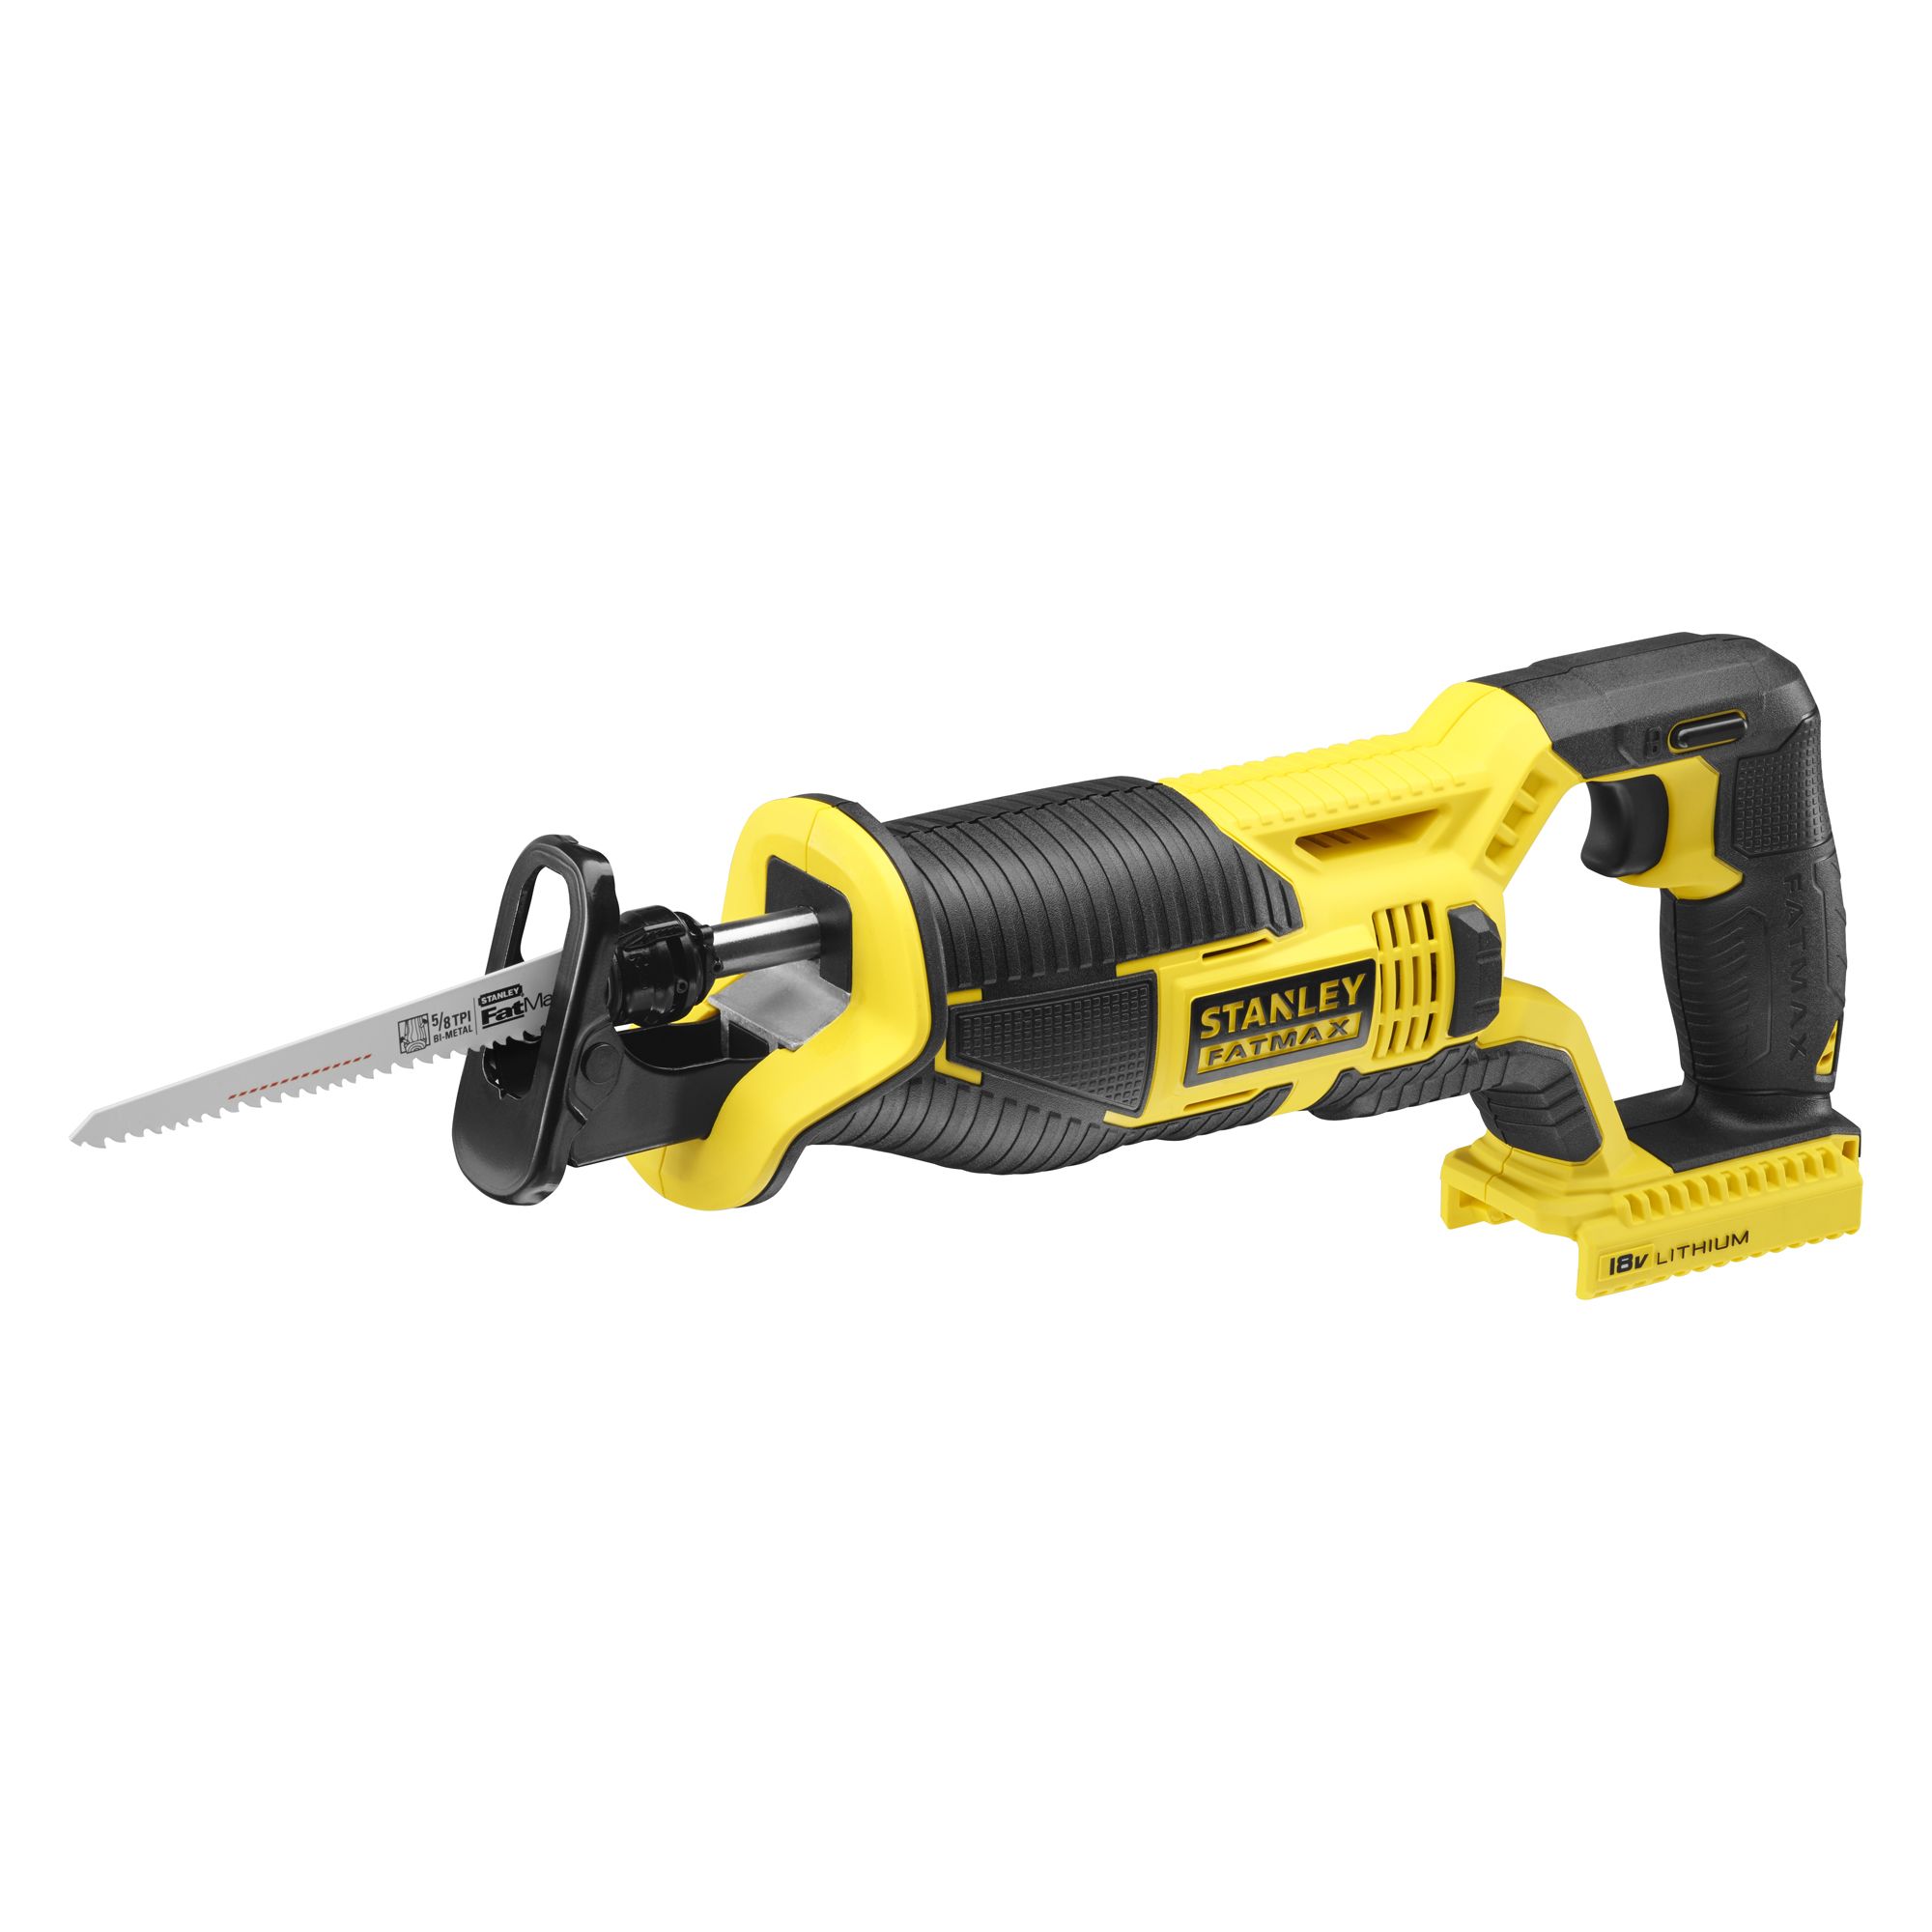 Stanley FatMax 18V Cordless Reciprocating saw